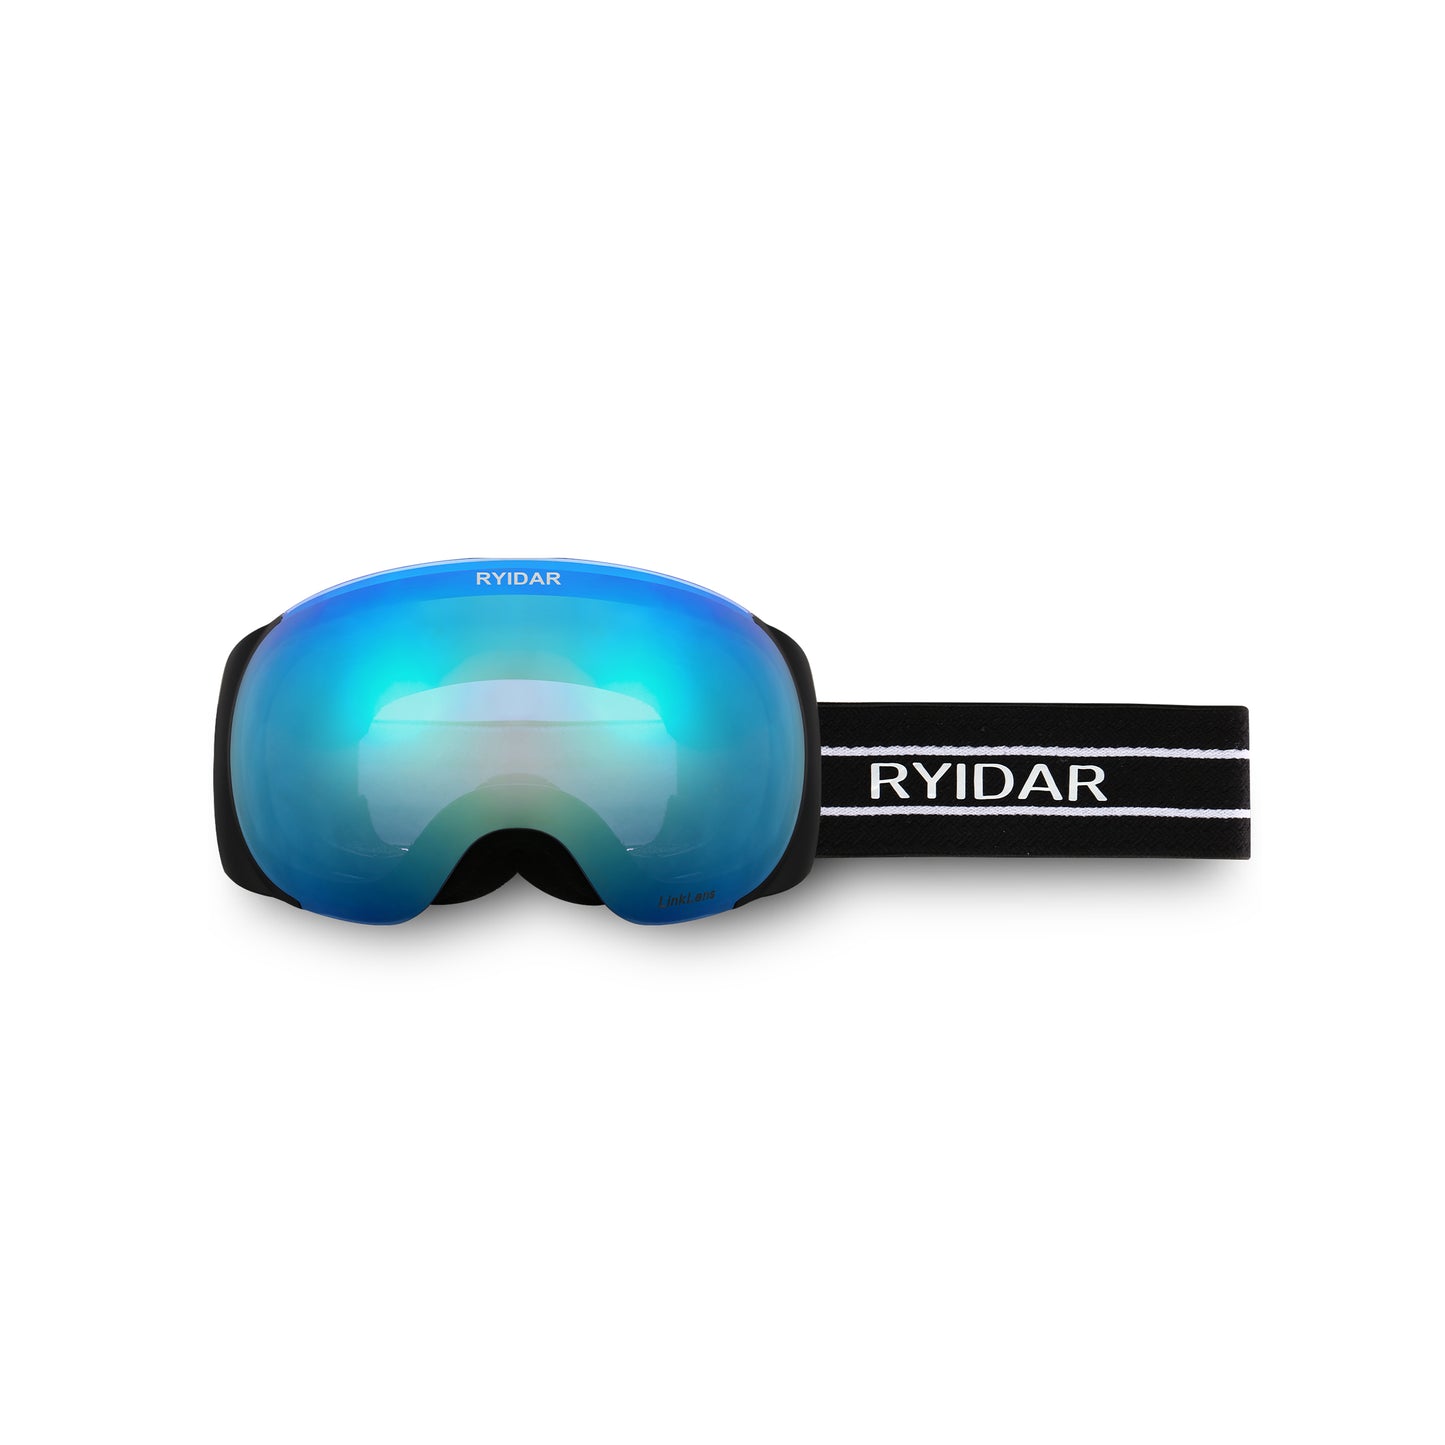 LinkLens Pro 2 Audio Snow Goggles Standard Fit